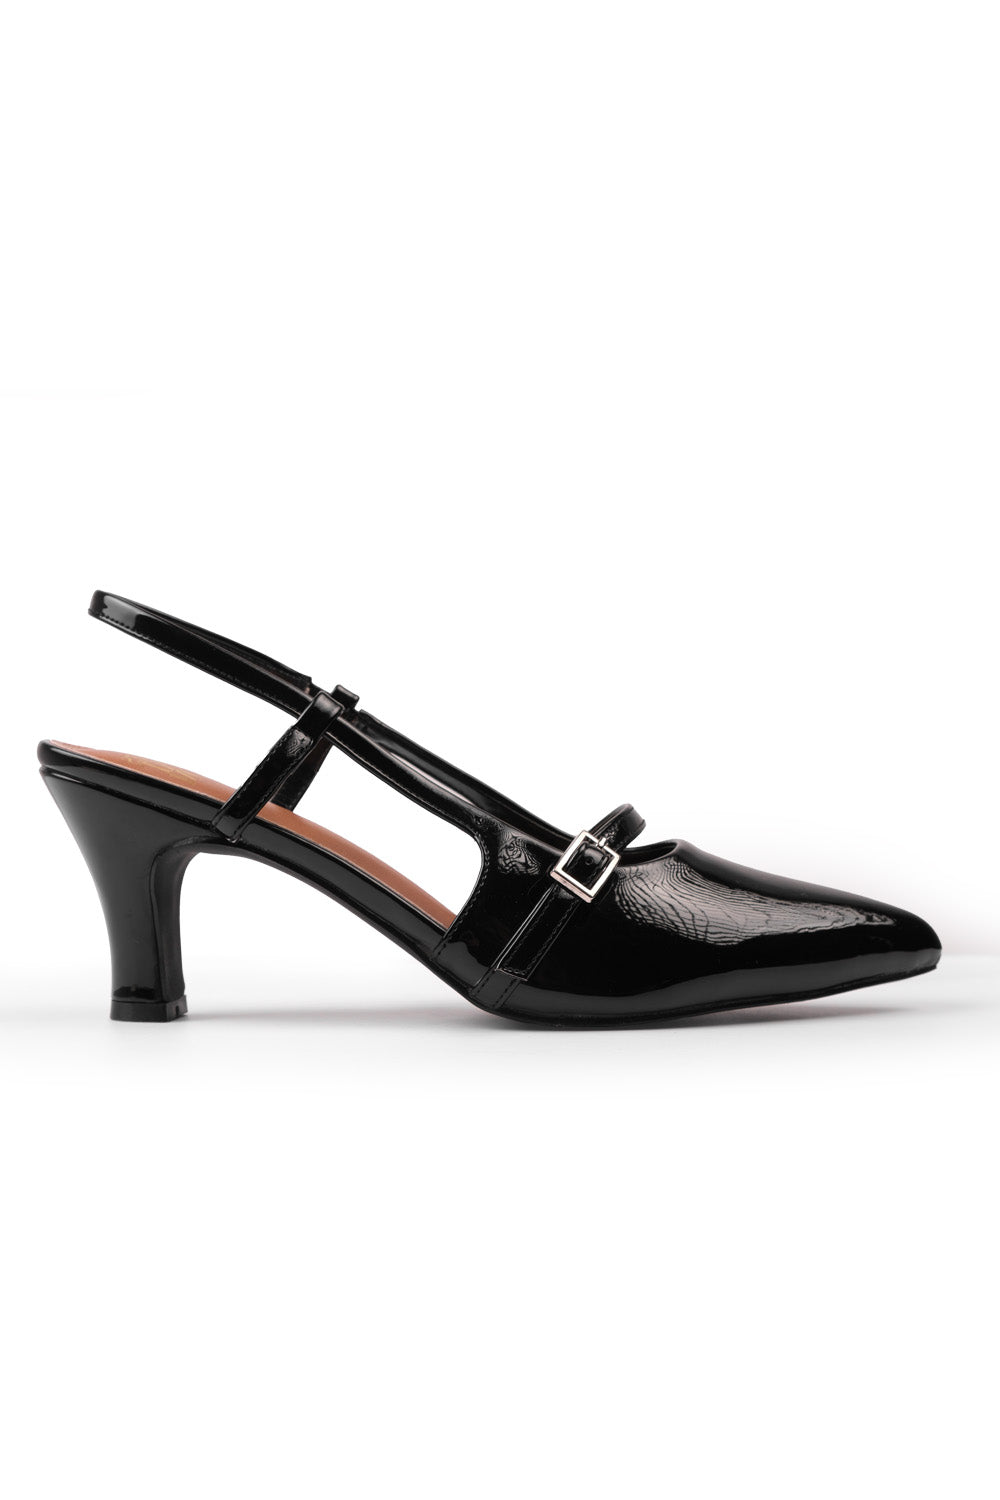 ON POINT WIDE FIT MID HEEL SLINGBACK SANDALS WITH STRAP AND BUCKLE DETAIL IN BLACK PATENT